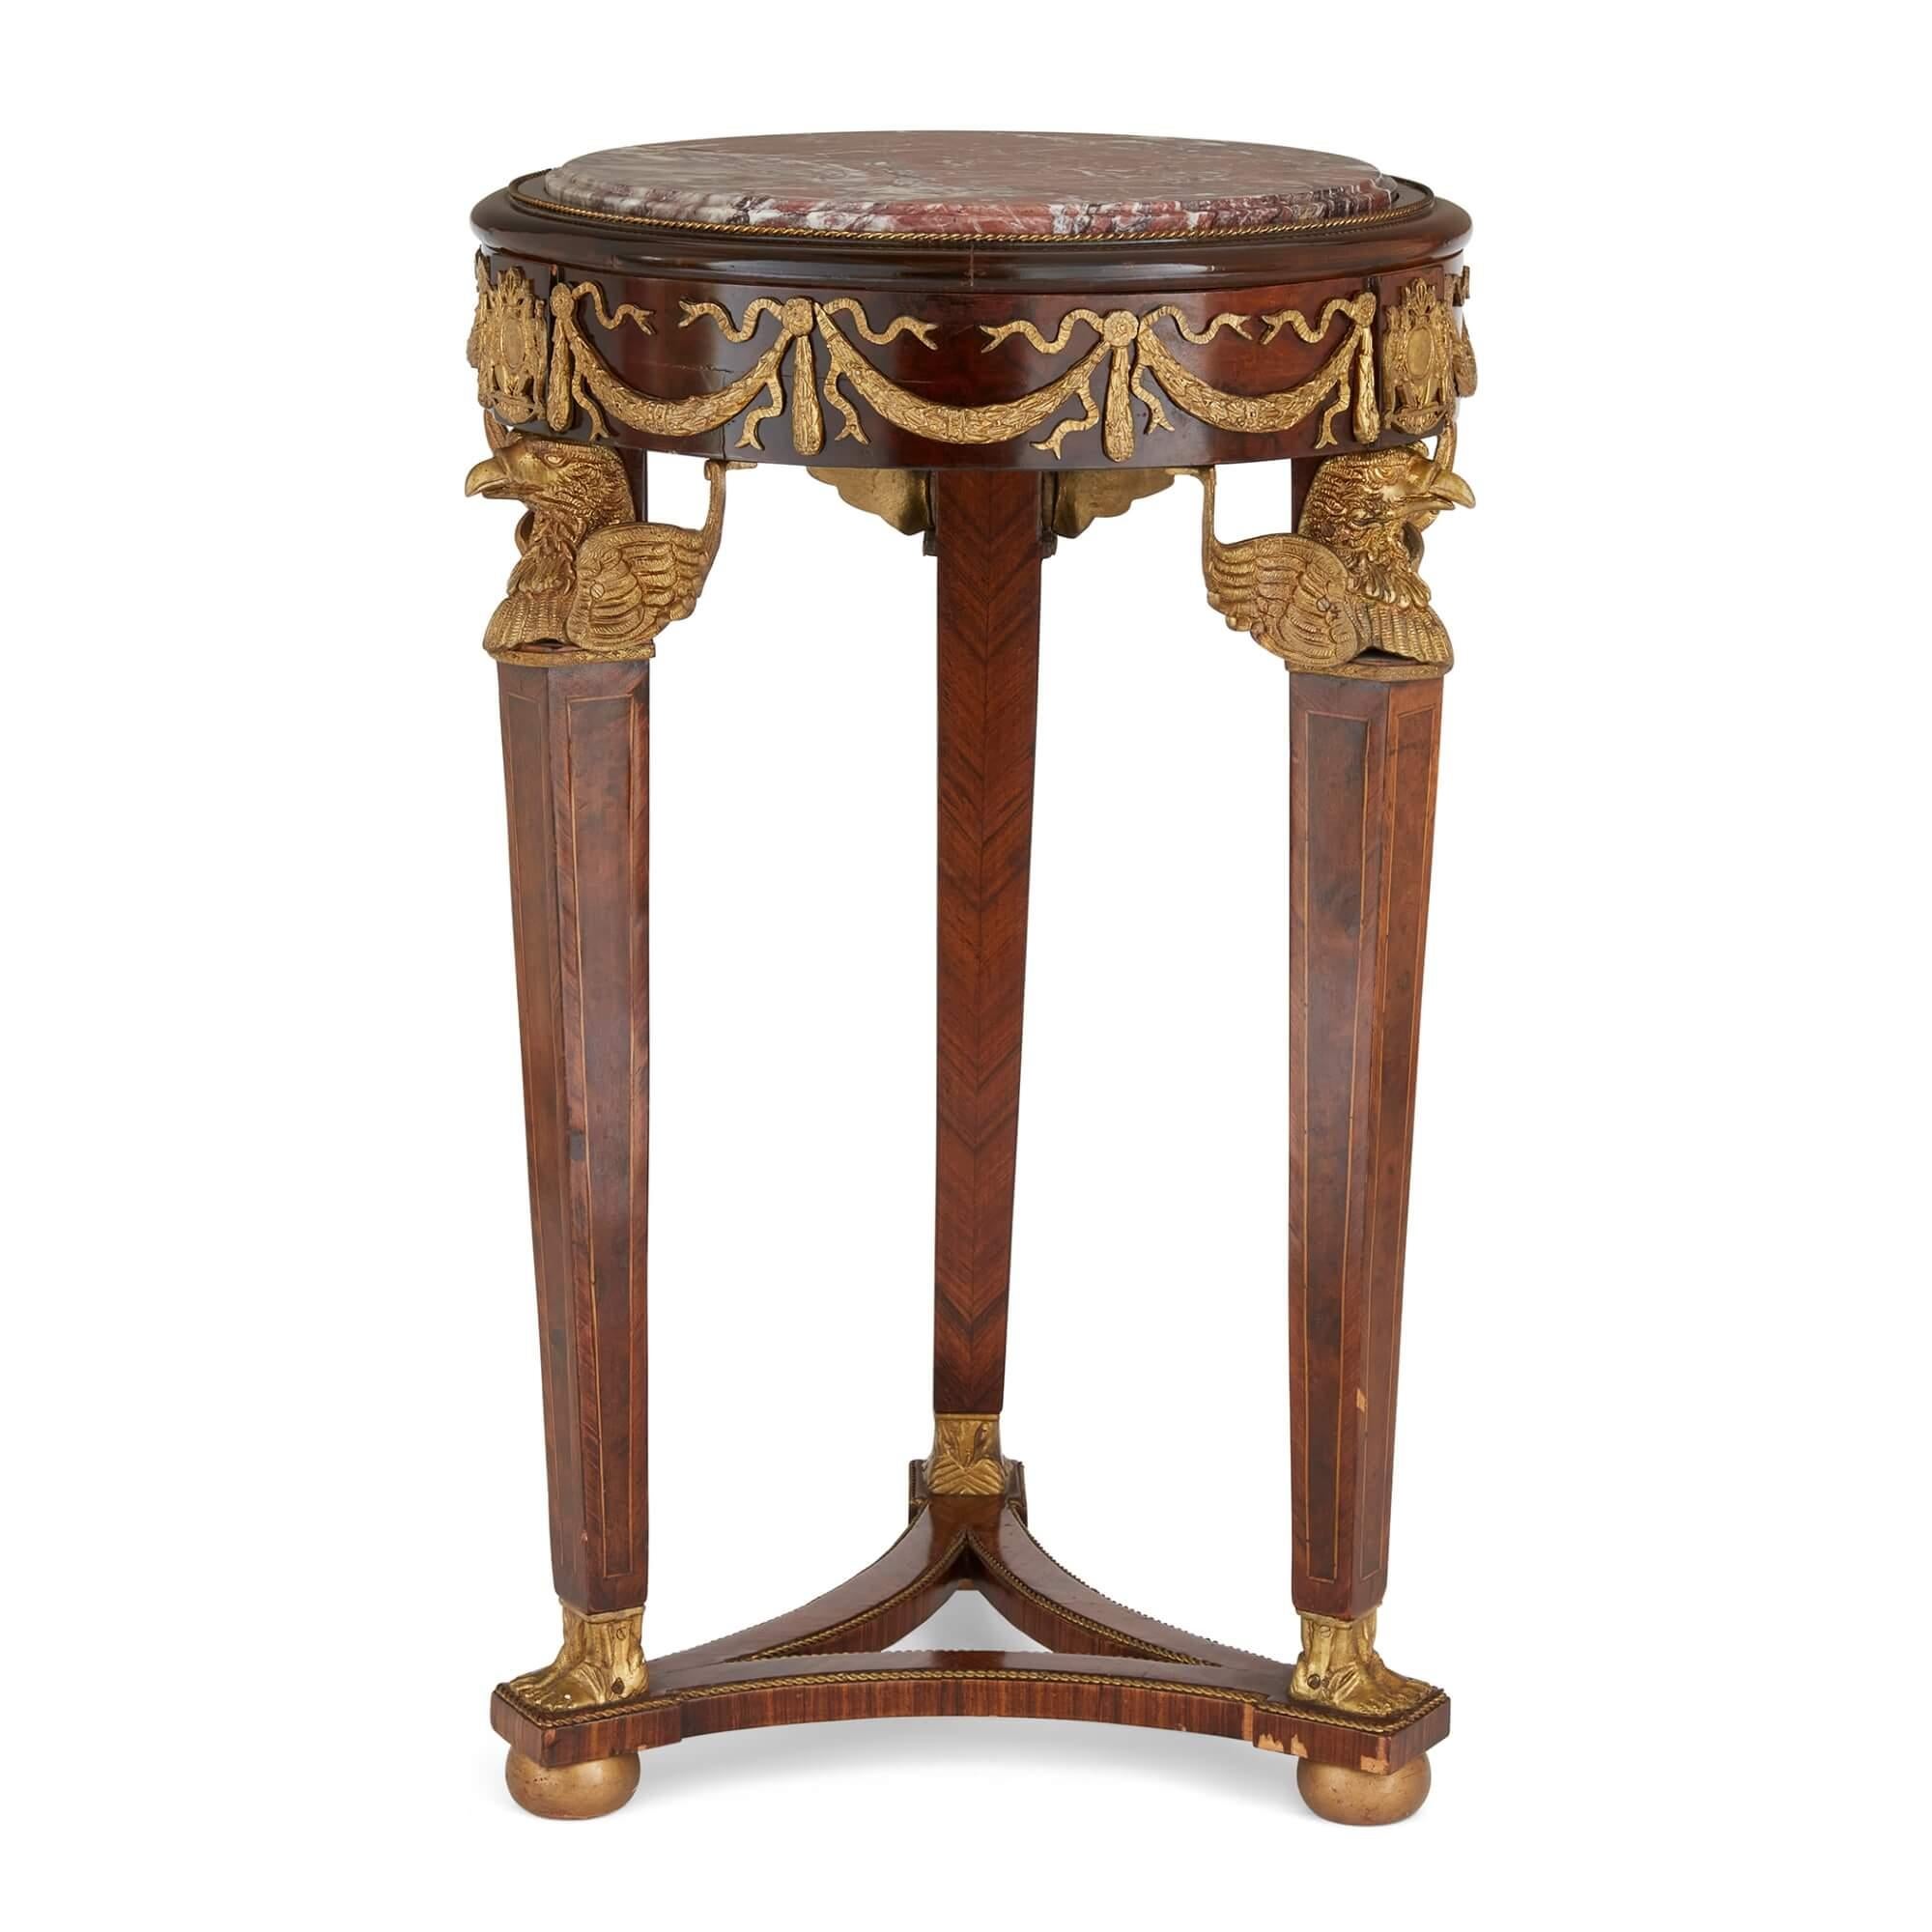 Pair of French Empire style ormolu, wood and marble pedestals 
French, 20th Century 
Height 83cm, diameter 52cm 

This superb pair of French 20th century pedestals celebrates the very refined and elegant Empire style.  

Each pedestal is mounted